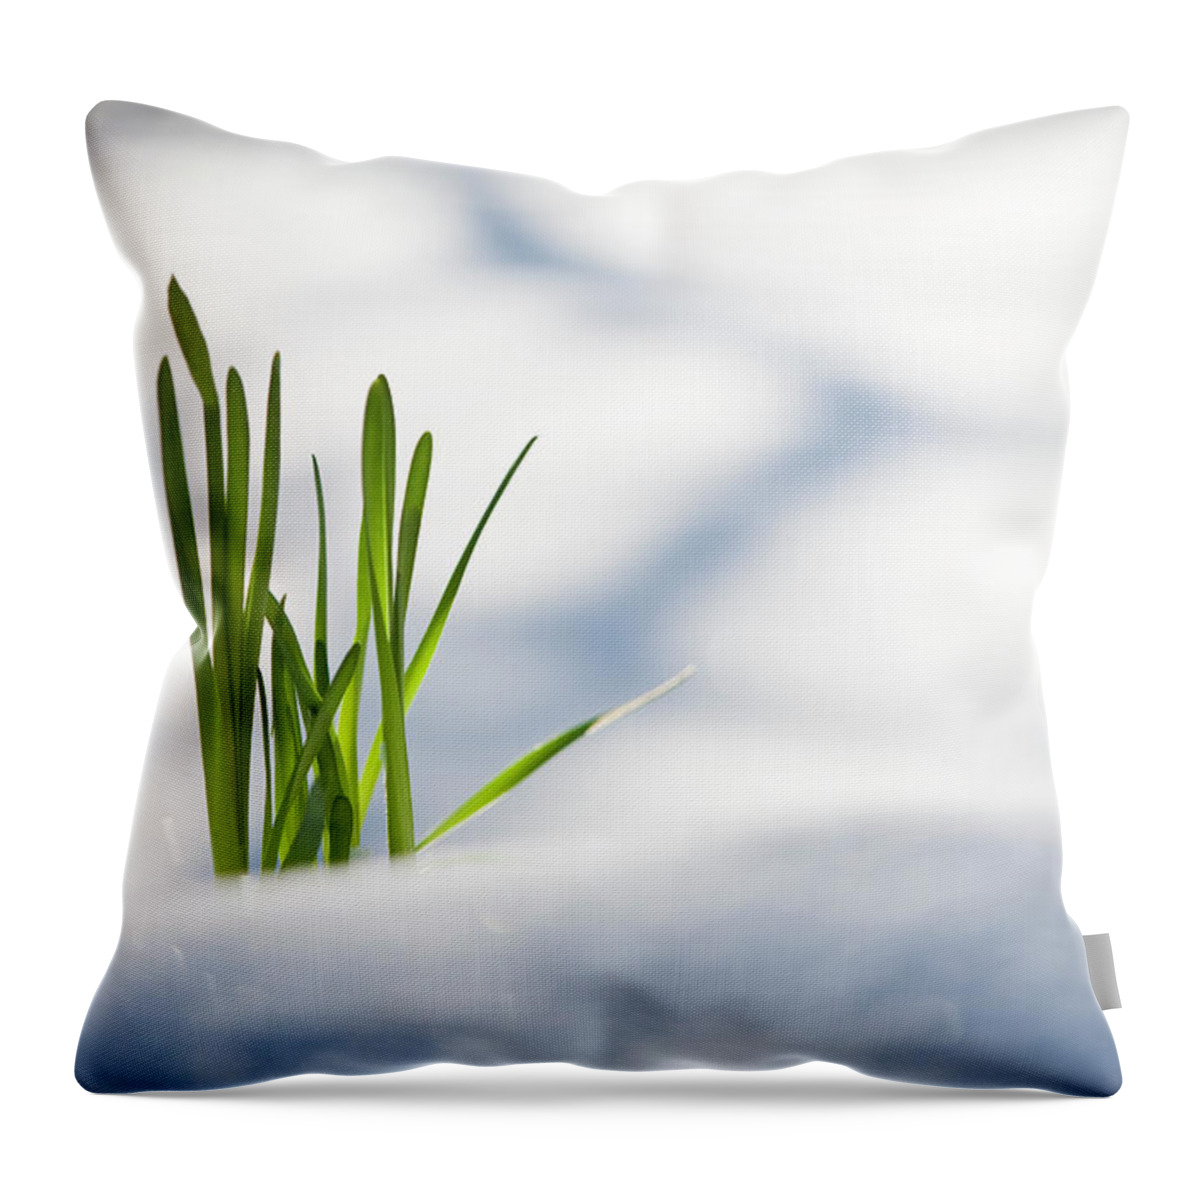 Snow Throw Pillow featuring the photograph Green Plant Pushing Up Through Snow by Jake Wyman